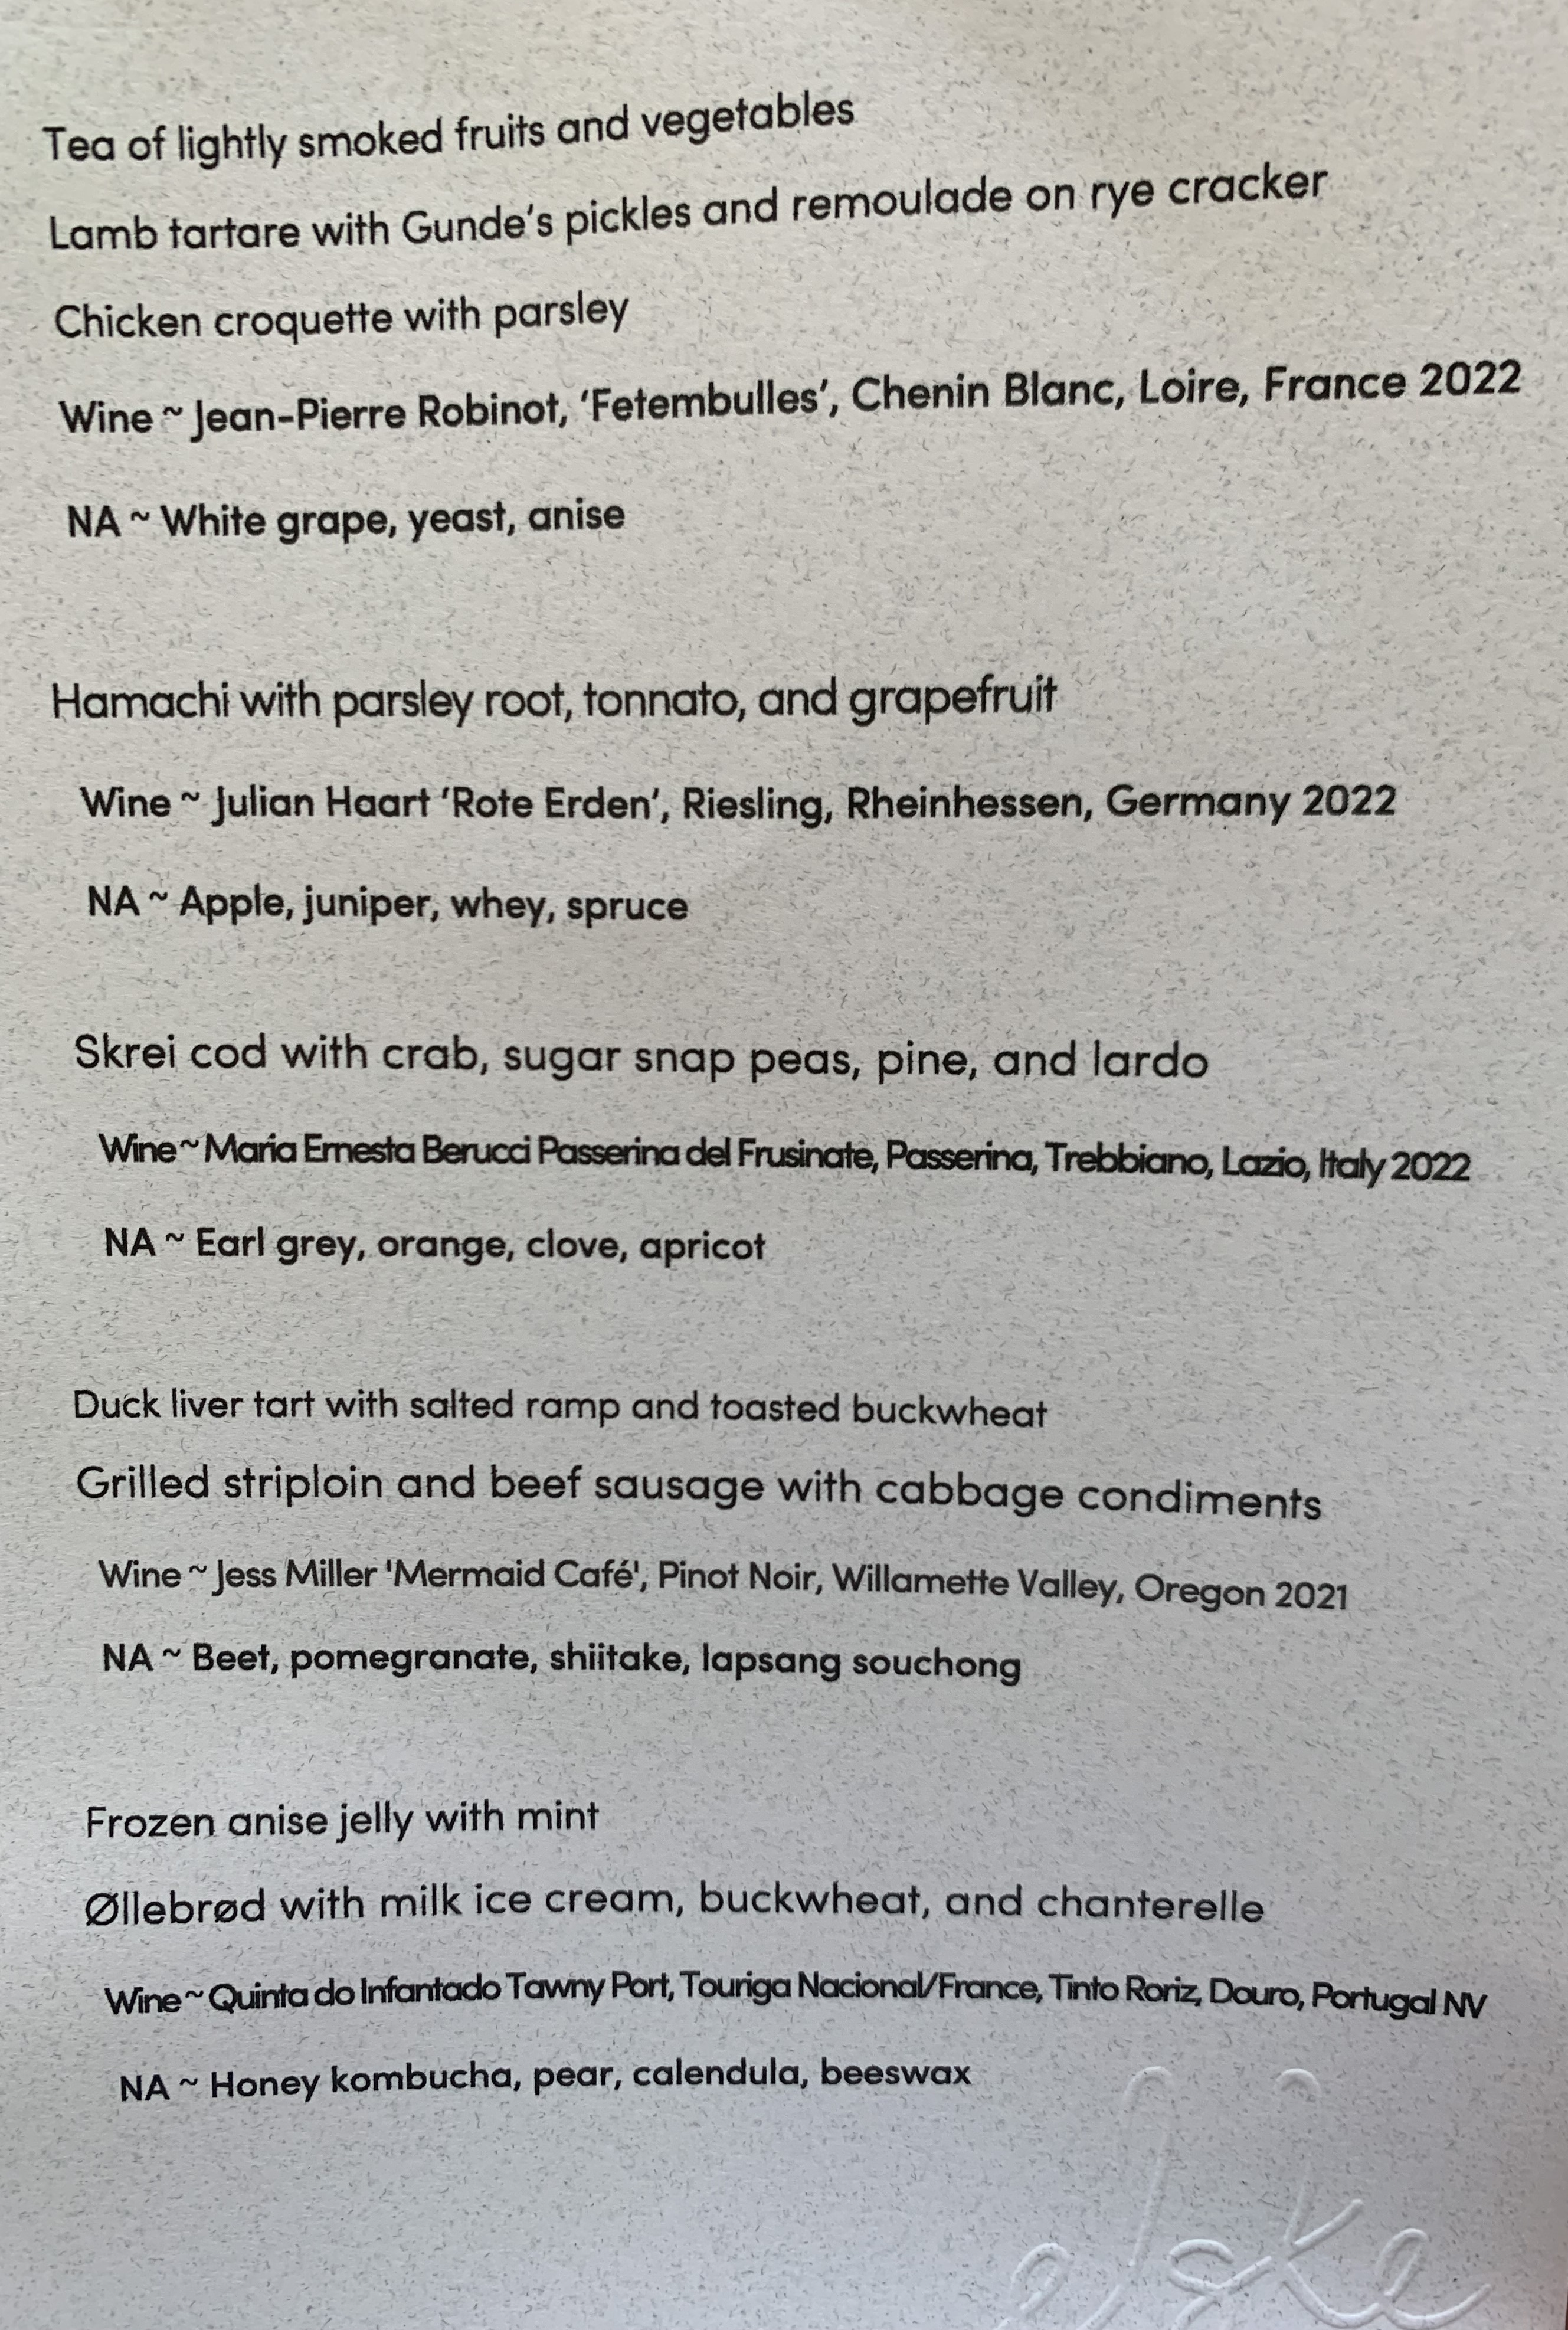 A menu listing all the dishes and their accompanying wines or non-alcoholic beverages.